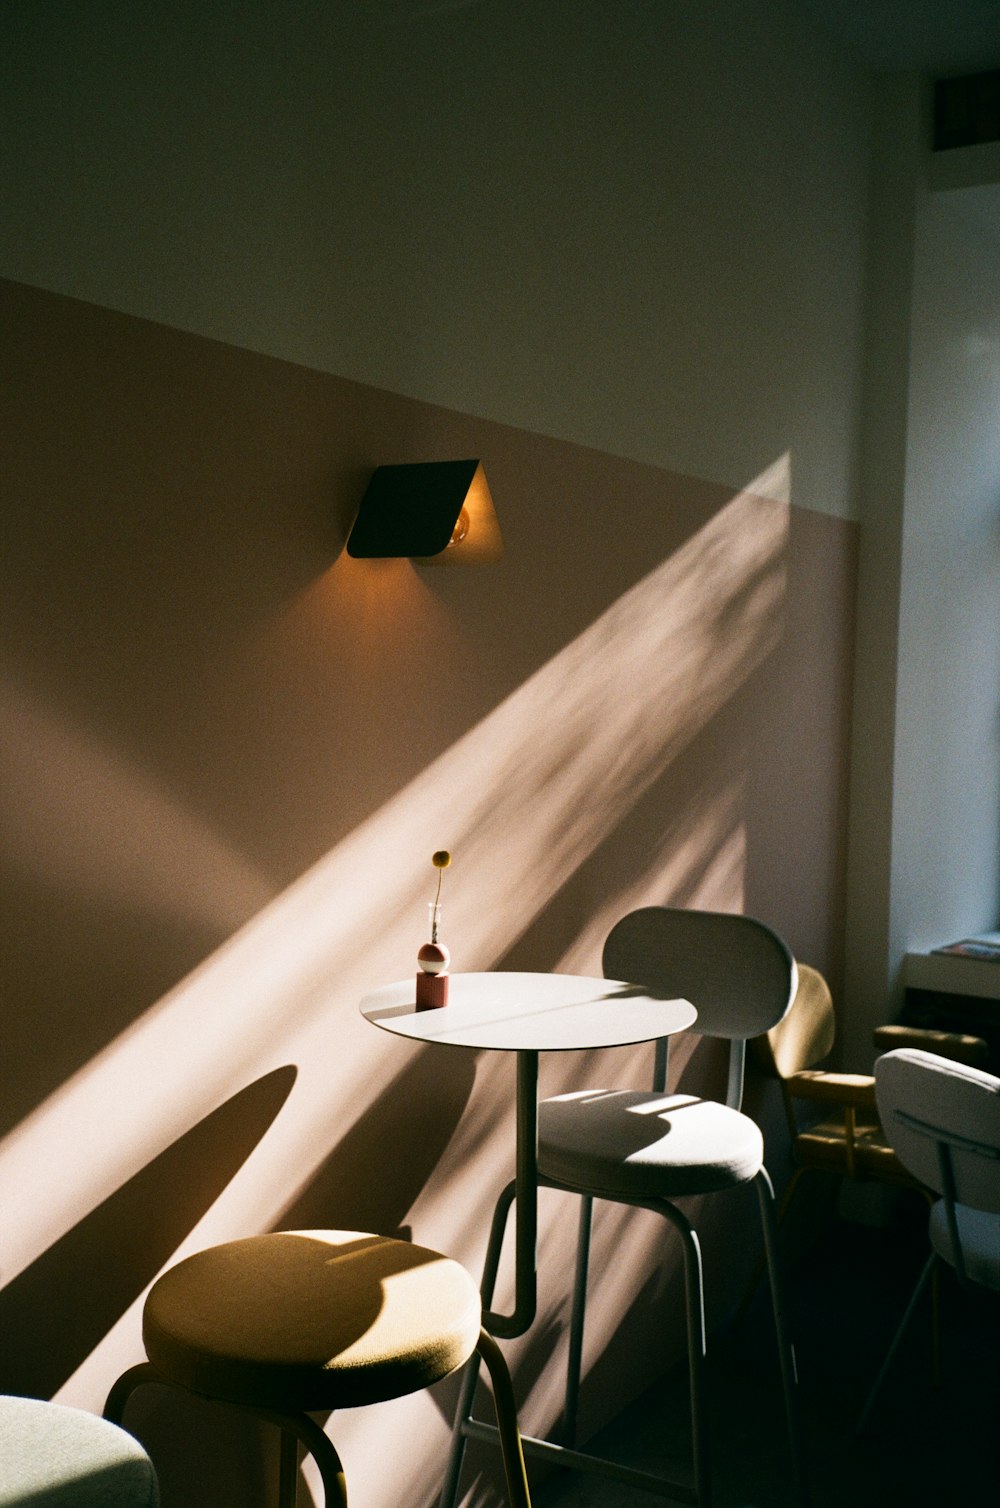 a table and chairs in a room with a wall light